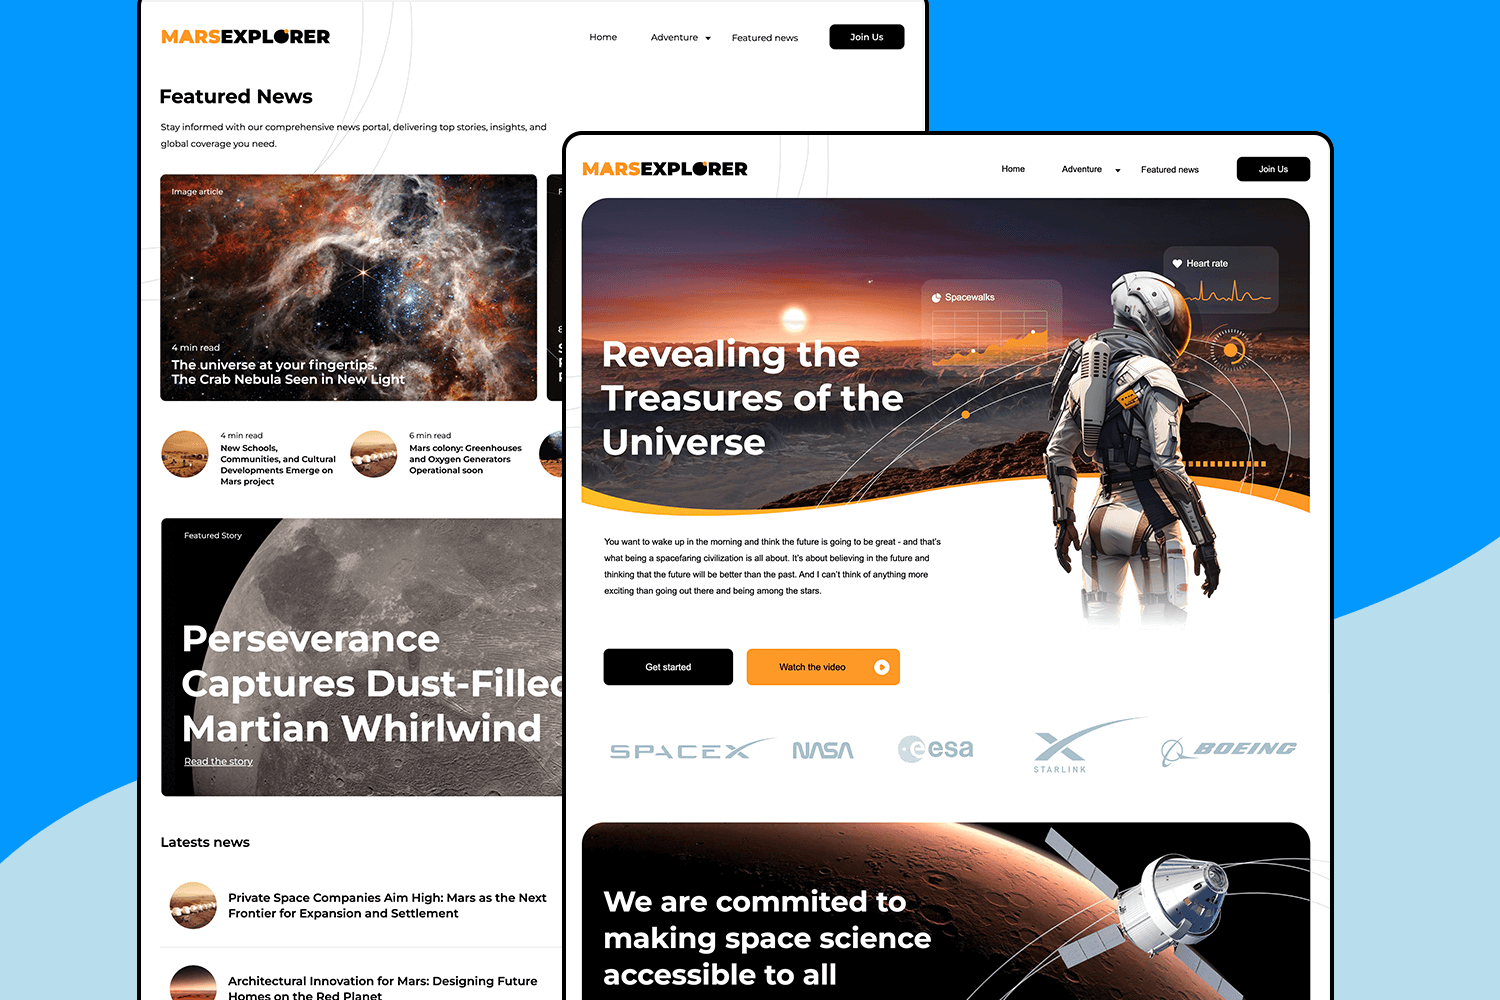 Mars exploration website featuring space missions and latest news